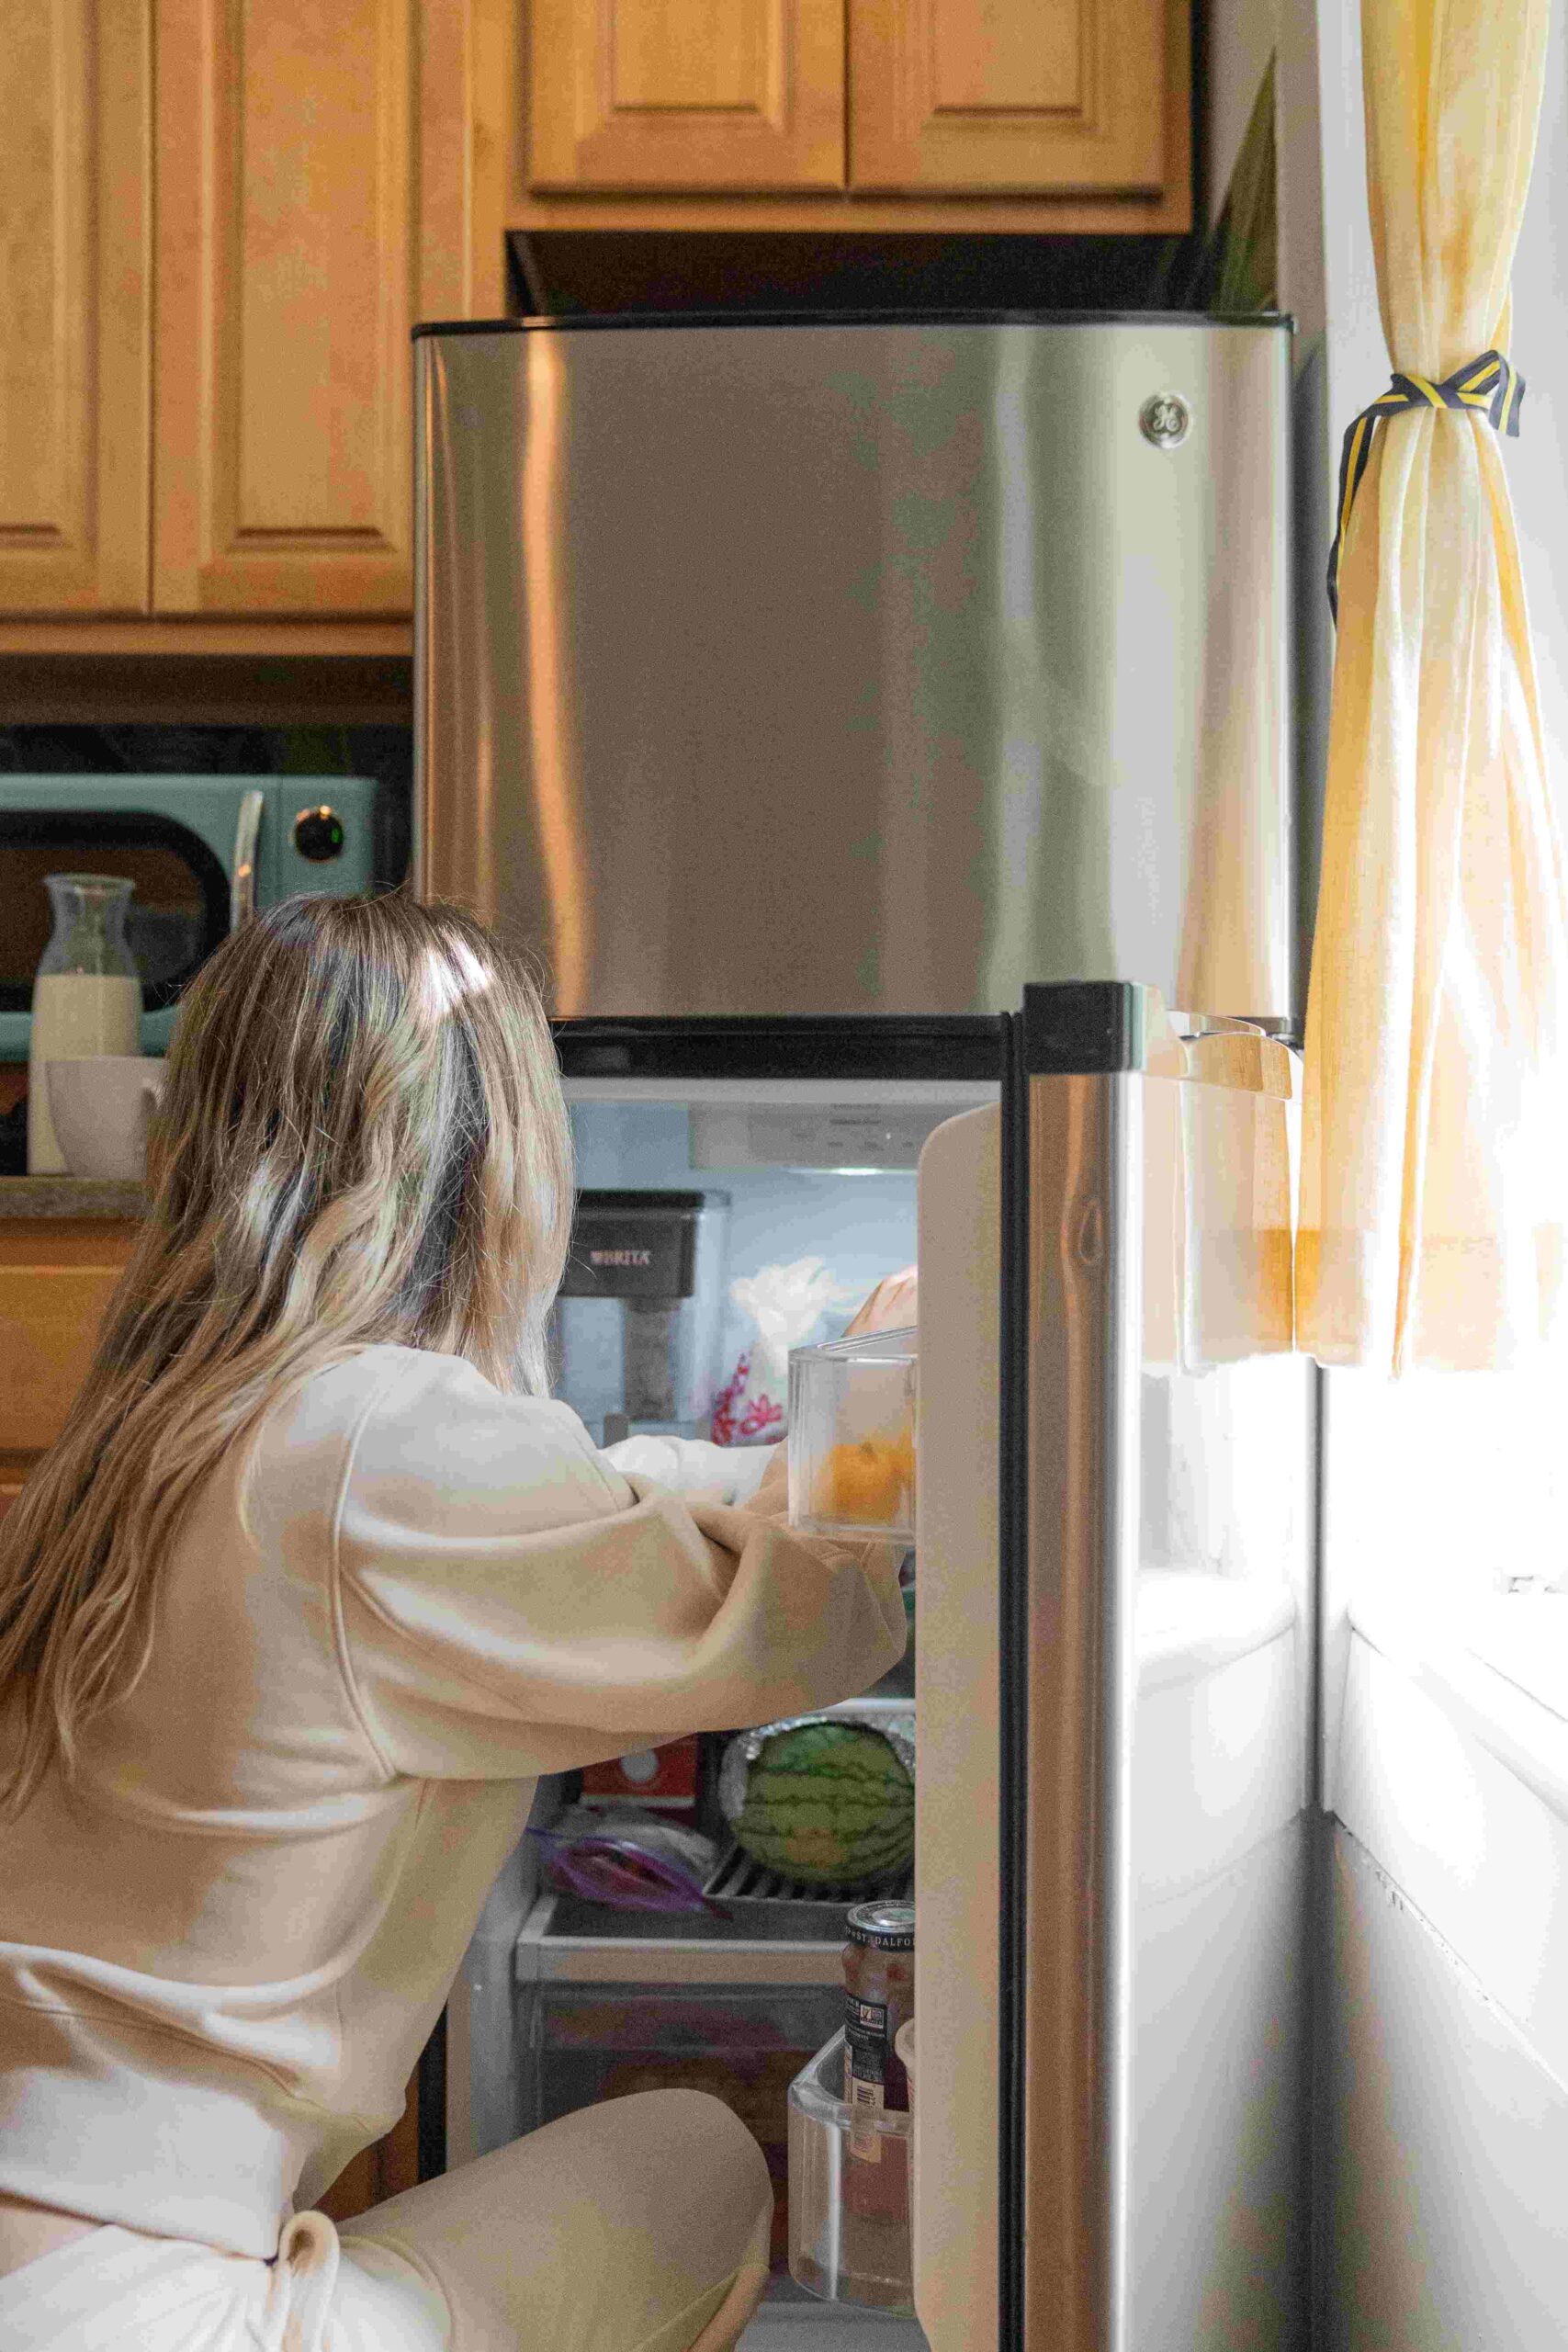 Girl reaching into fridge and taking food out